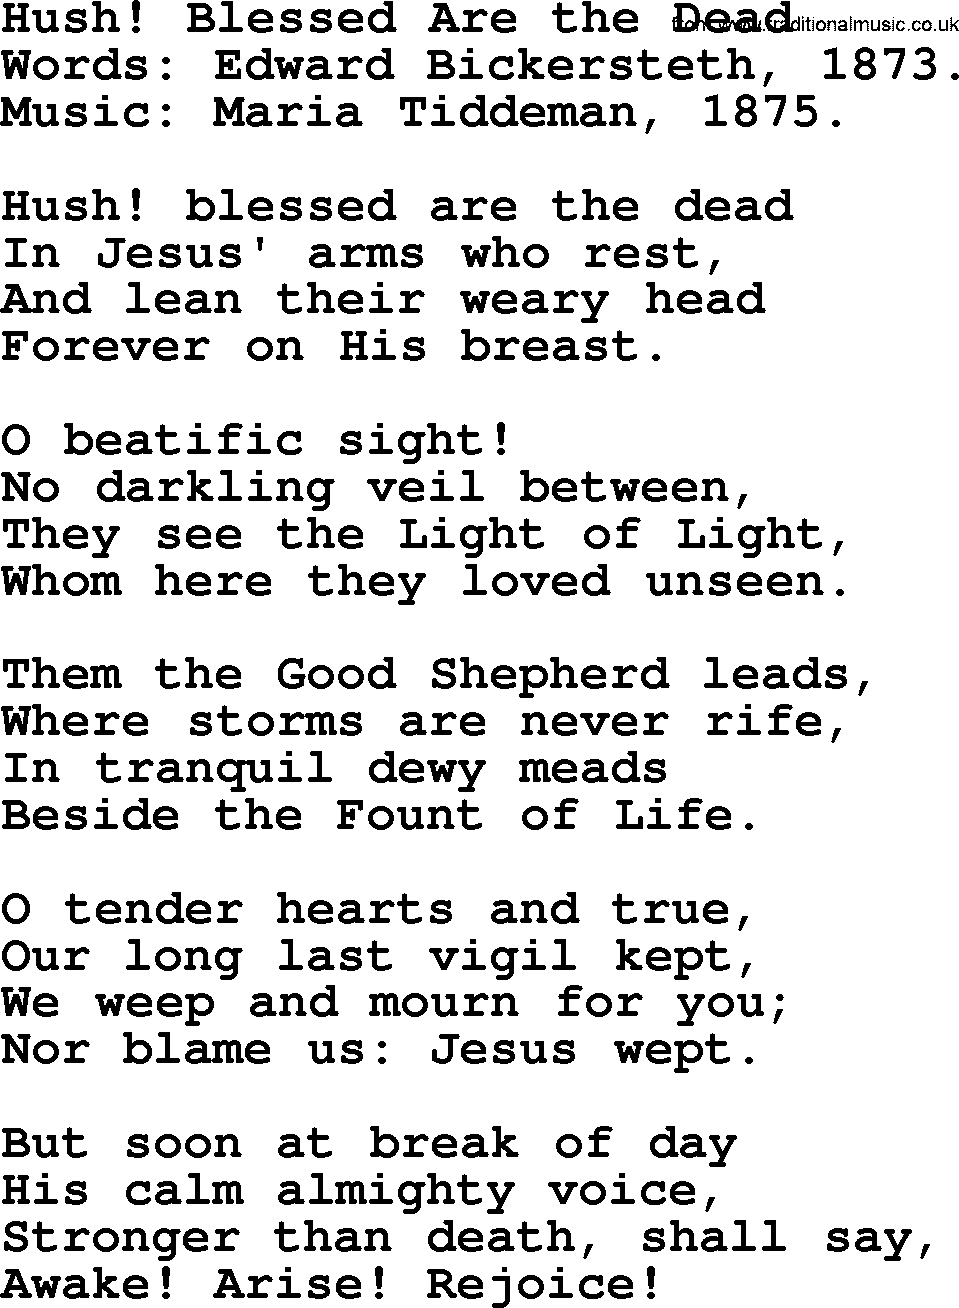 100+ Christian Funeral Hymns collection, Hymn: Hush! Blessed Are the Dead, lyrics and PDF